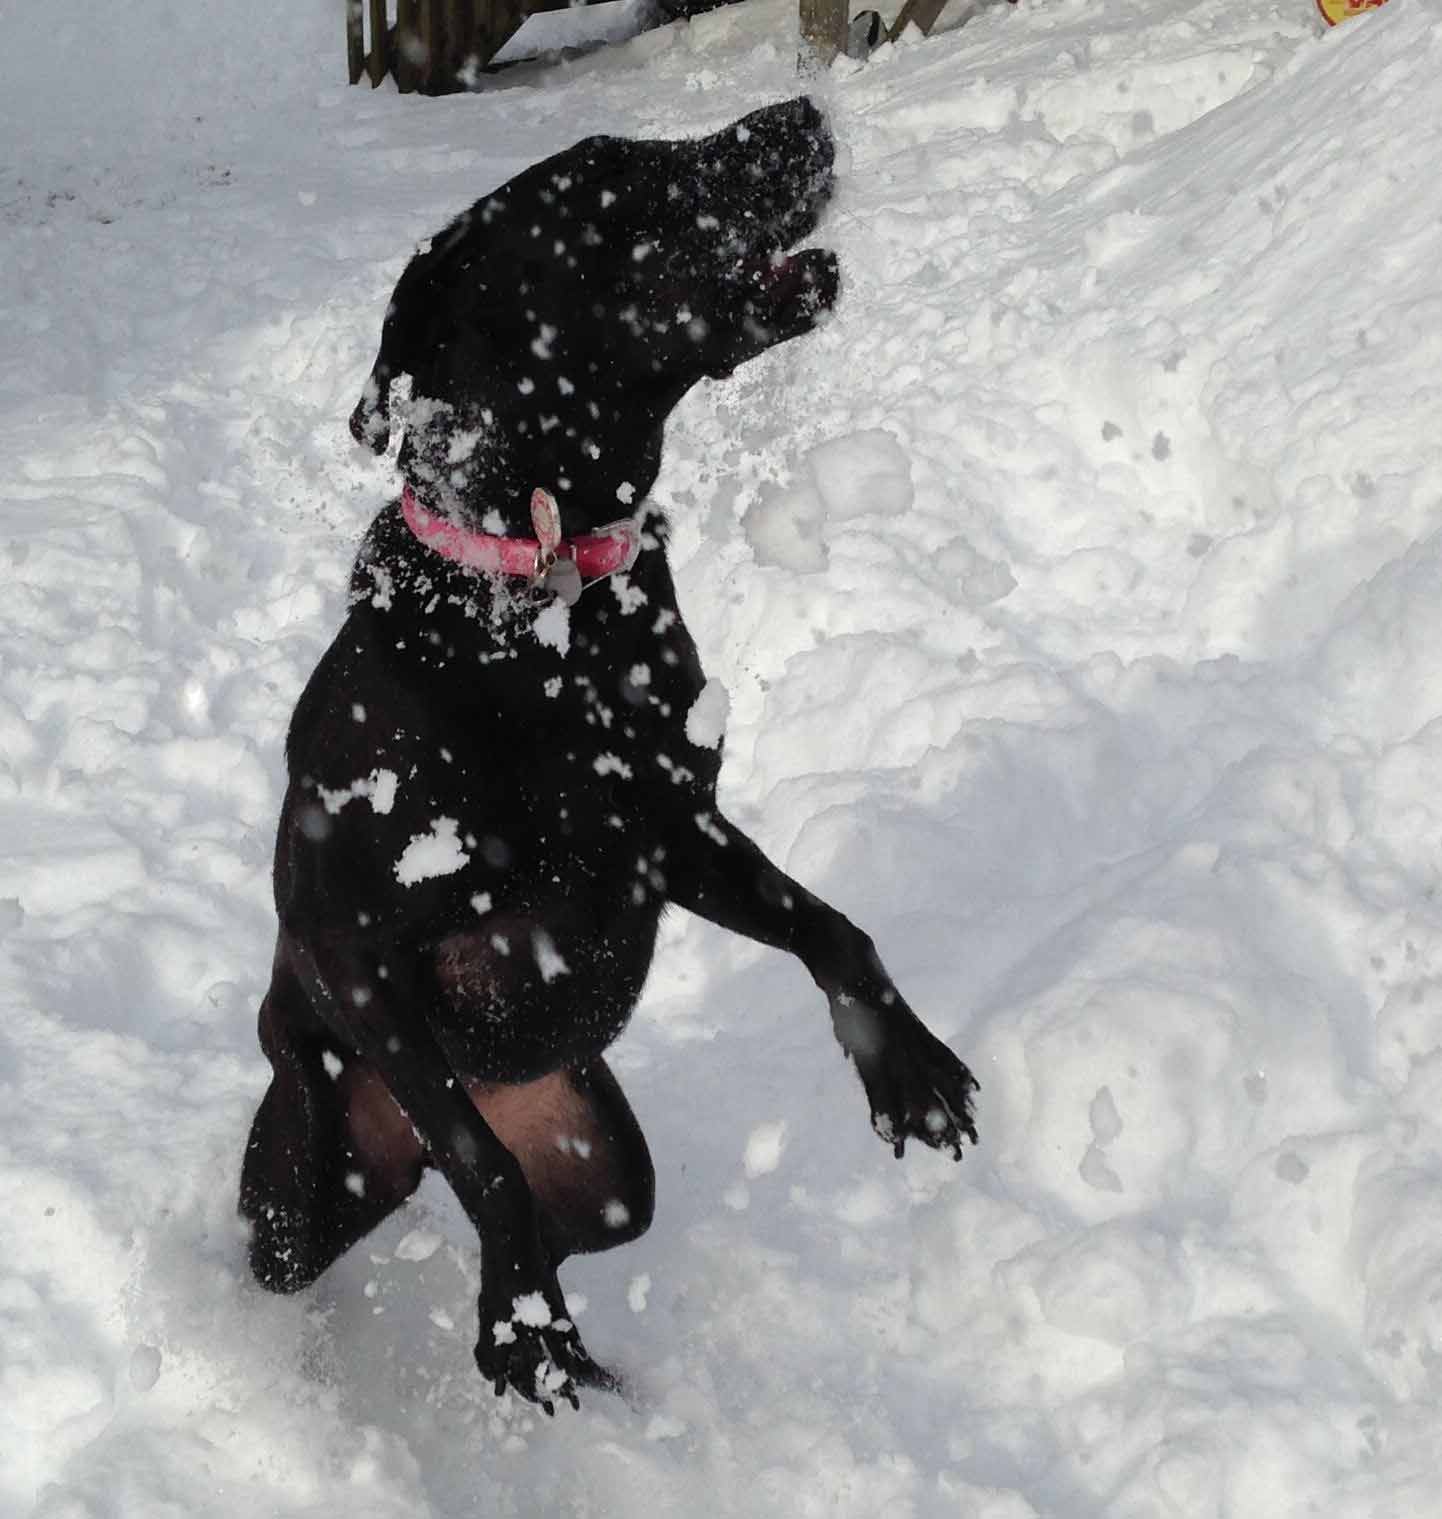 Why do dogs love snow